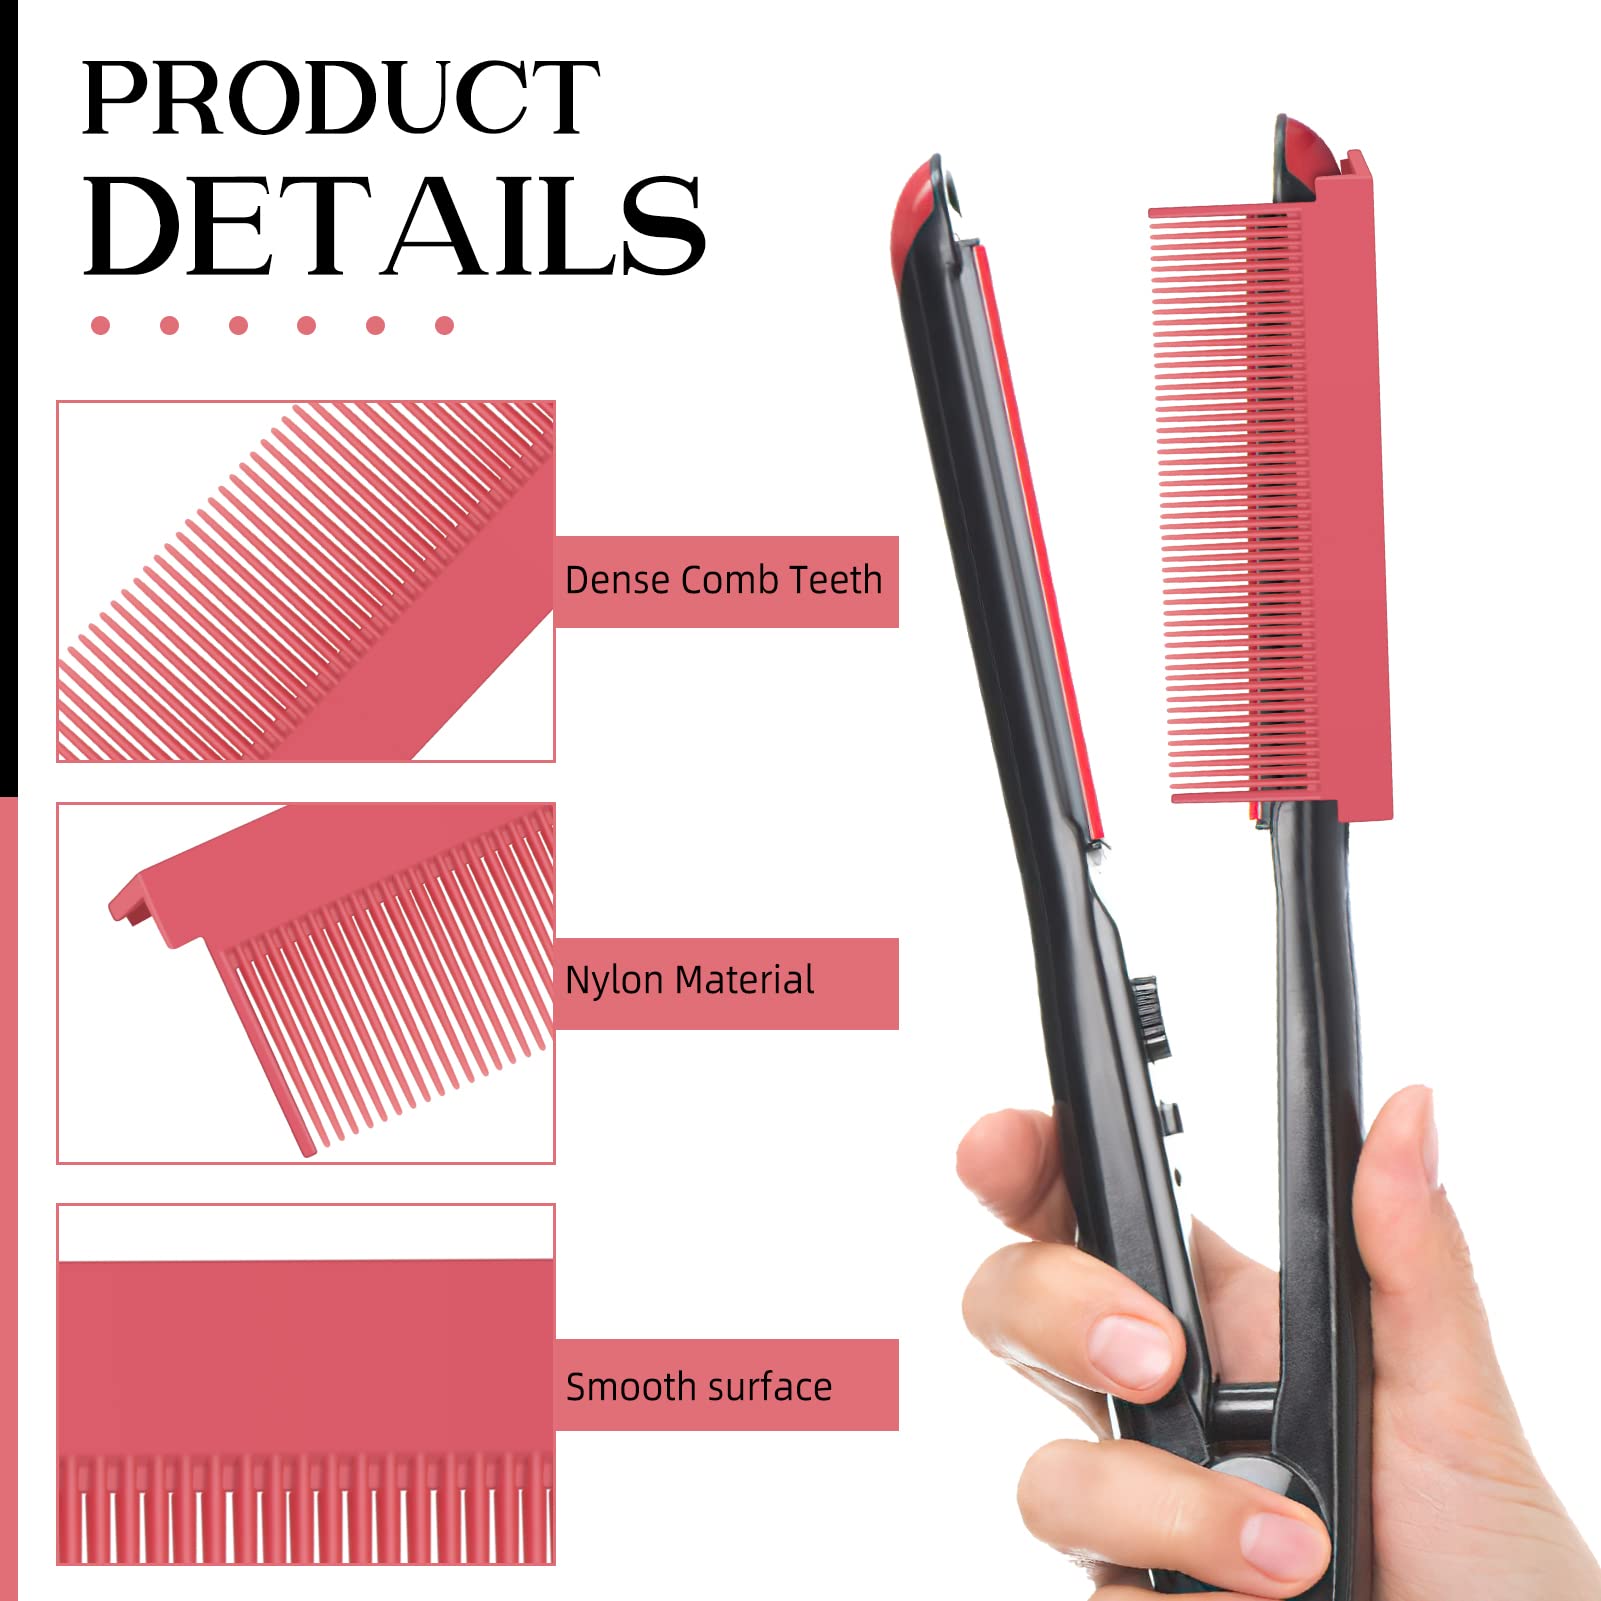 Barber Straightening Comb Attachment, Women DIY Combs Accessories Fit Hair Straightening Flat Iron Compact Hair Styling Tool Convenient Washable V Type for Professional or Home Use (B)